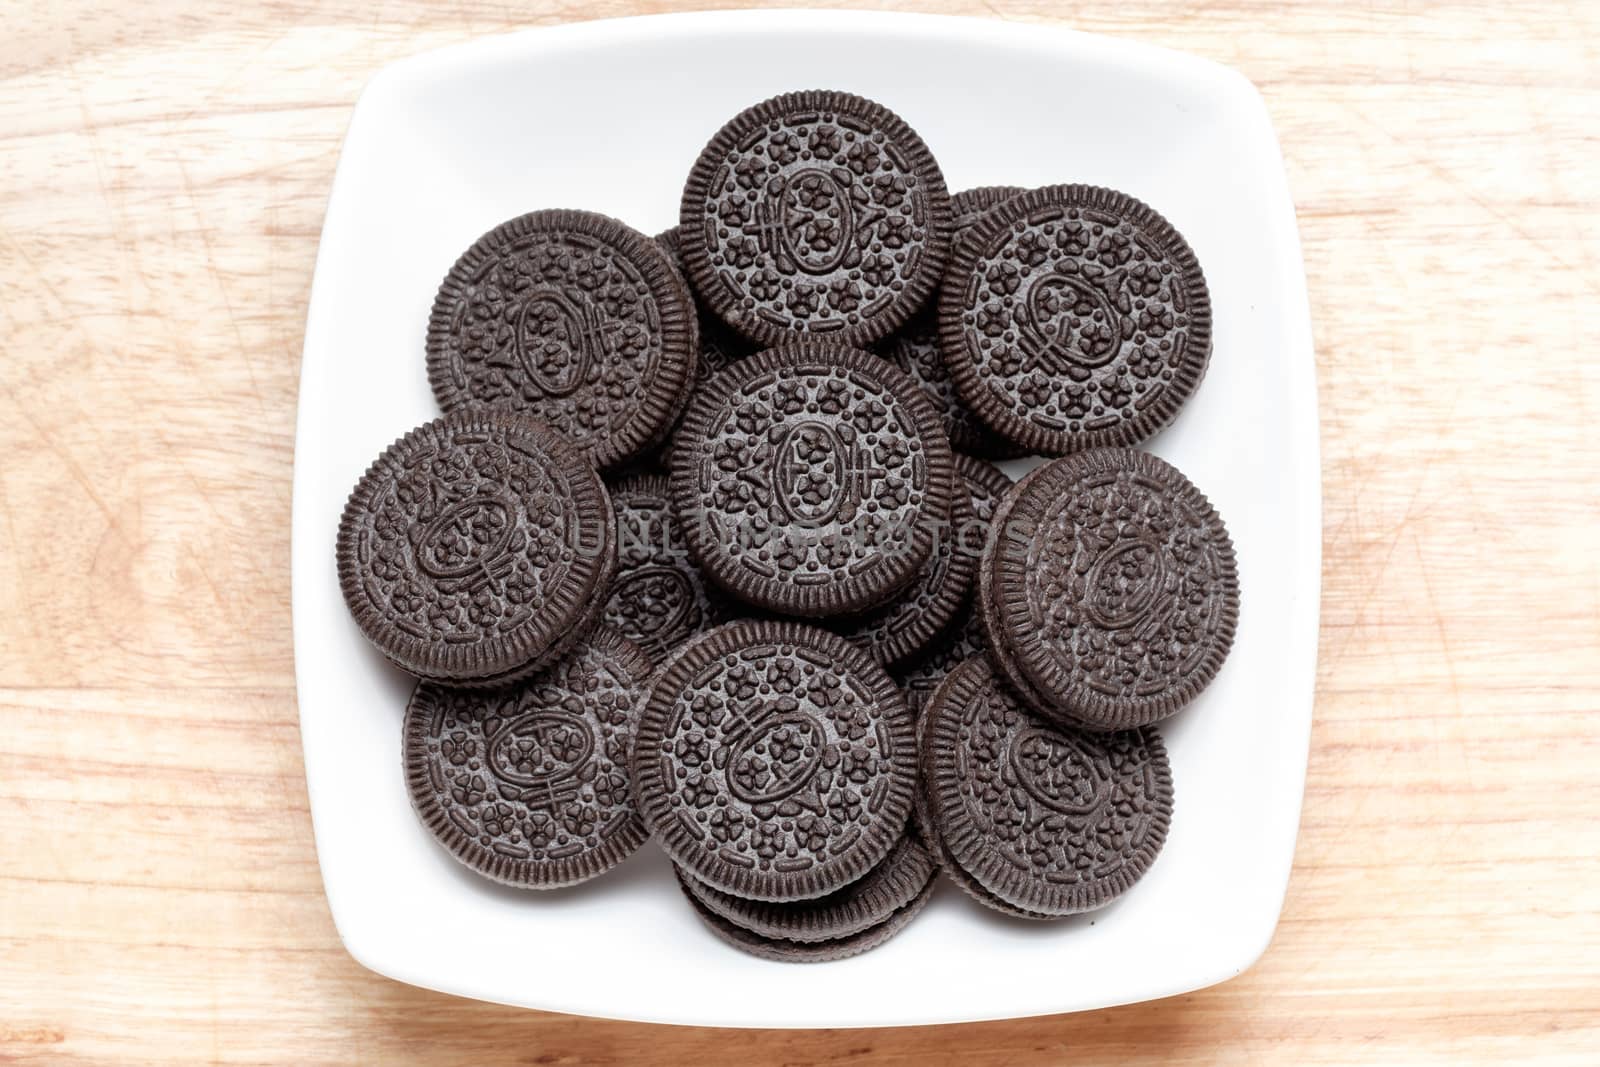 group of black cookie and cream in white ceramic dish. Look very tasty.